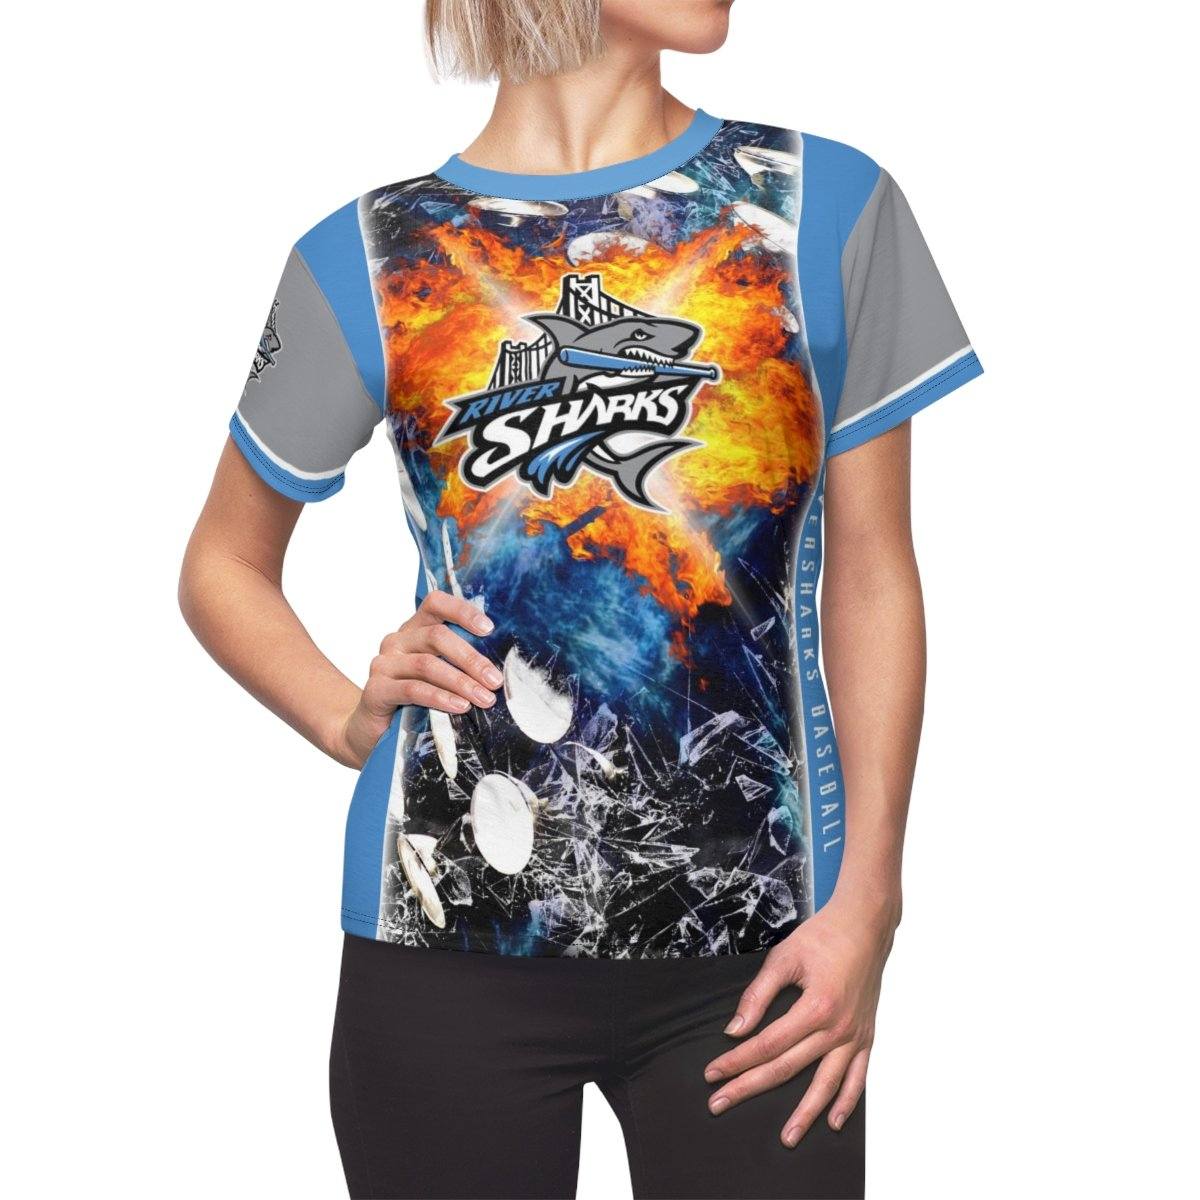 Stadium Lights - V.3 - Extreme Sportswear Women's Cut & Sew Template-Photoshop Template - Photo Solutions